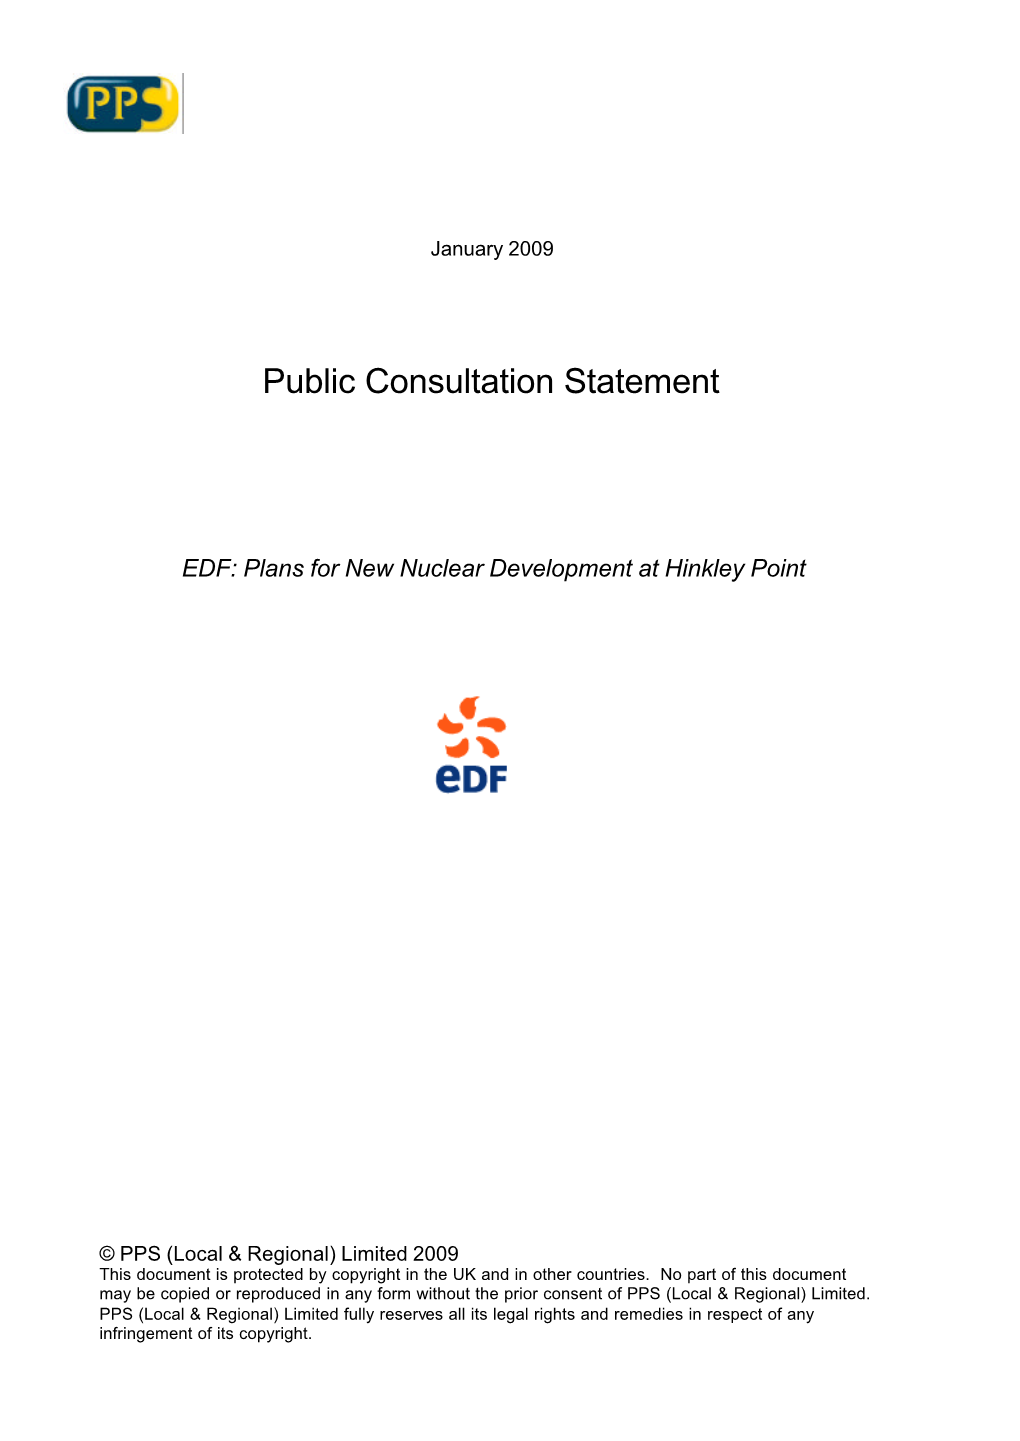 Hinkley Point Public Consultation Statement January 2009 …